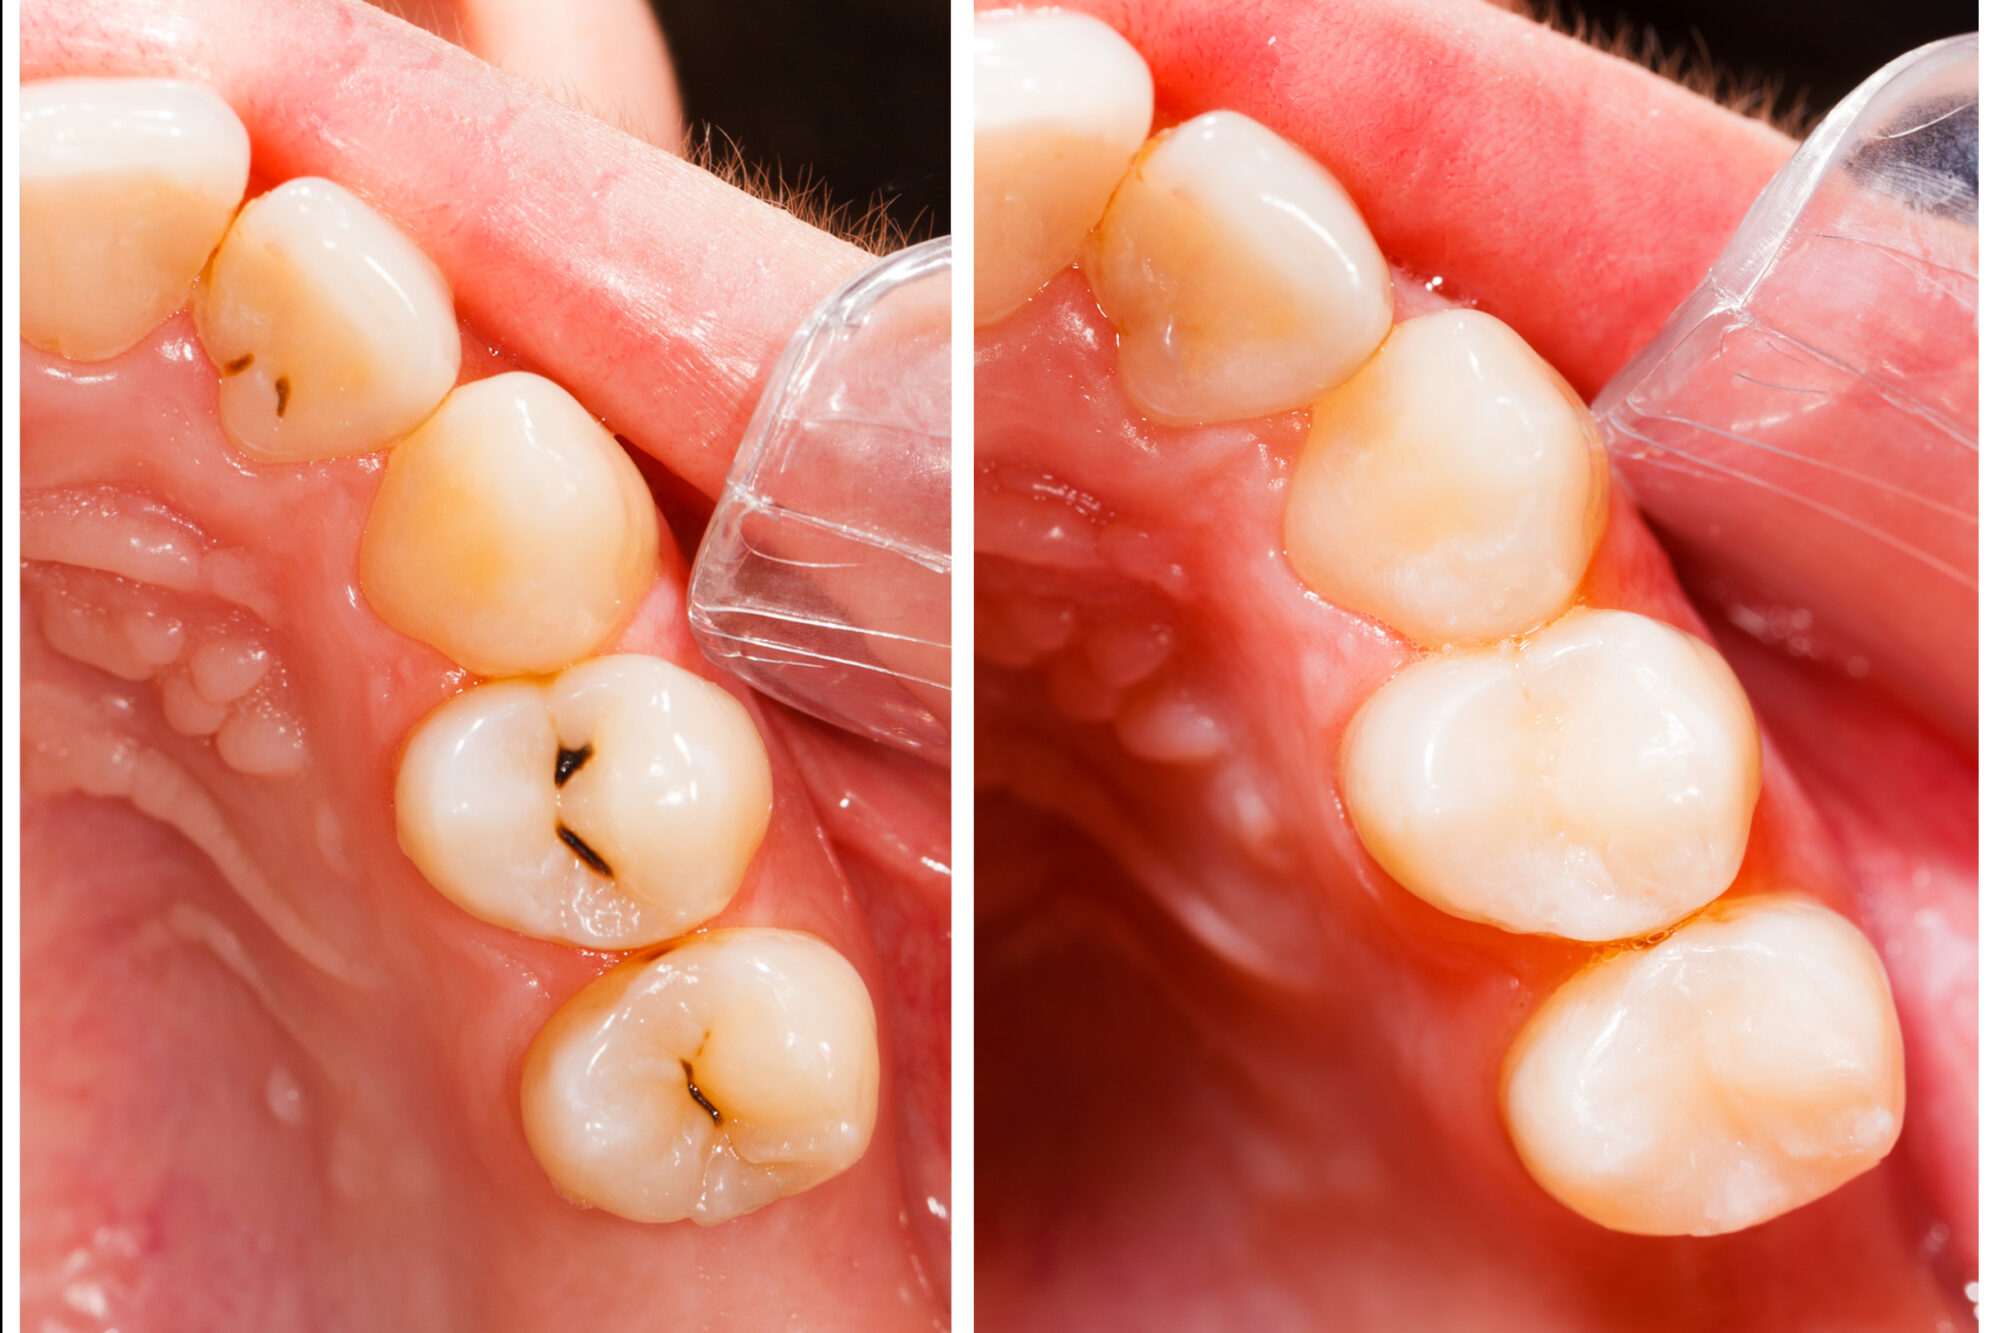 Teeth,Before,And,After,Treatment,-,Dental,Composite,Filling.